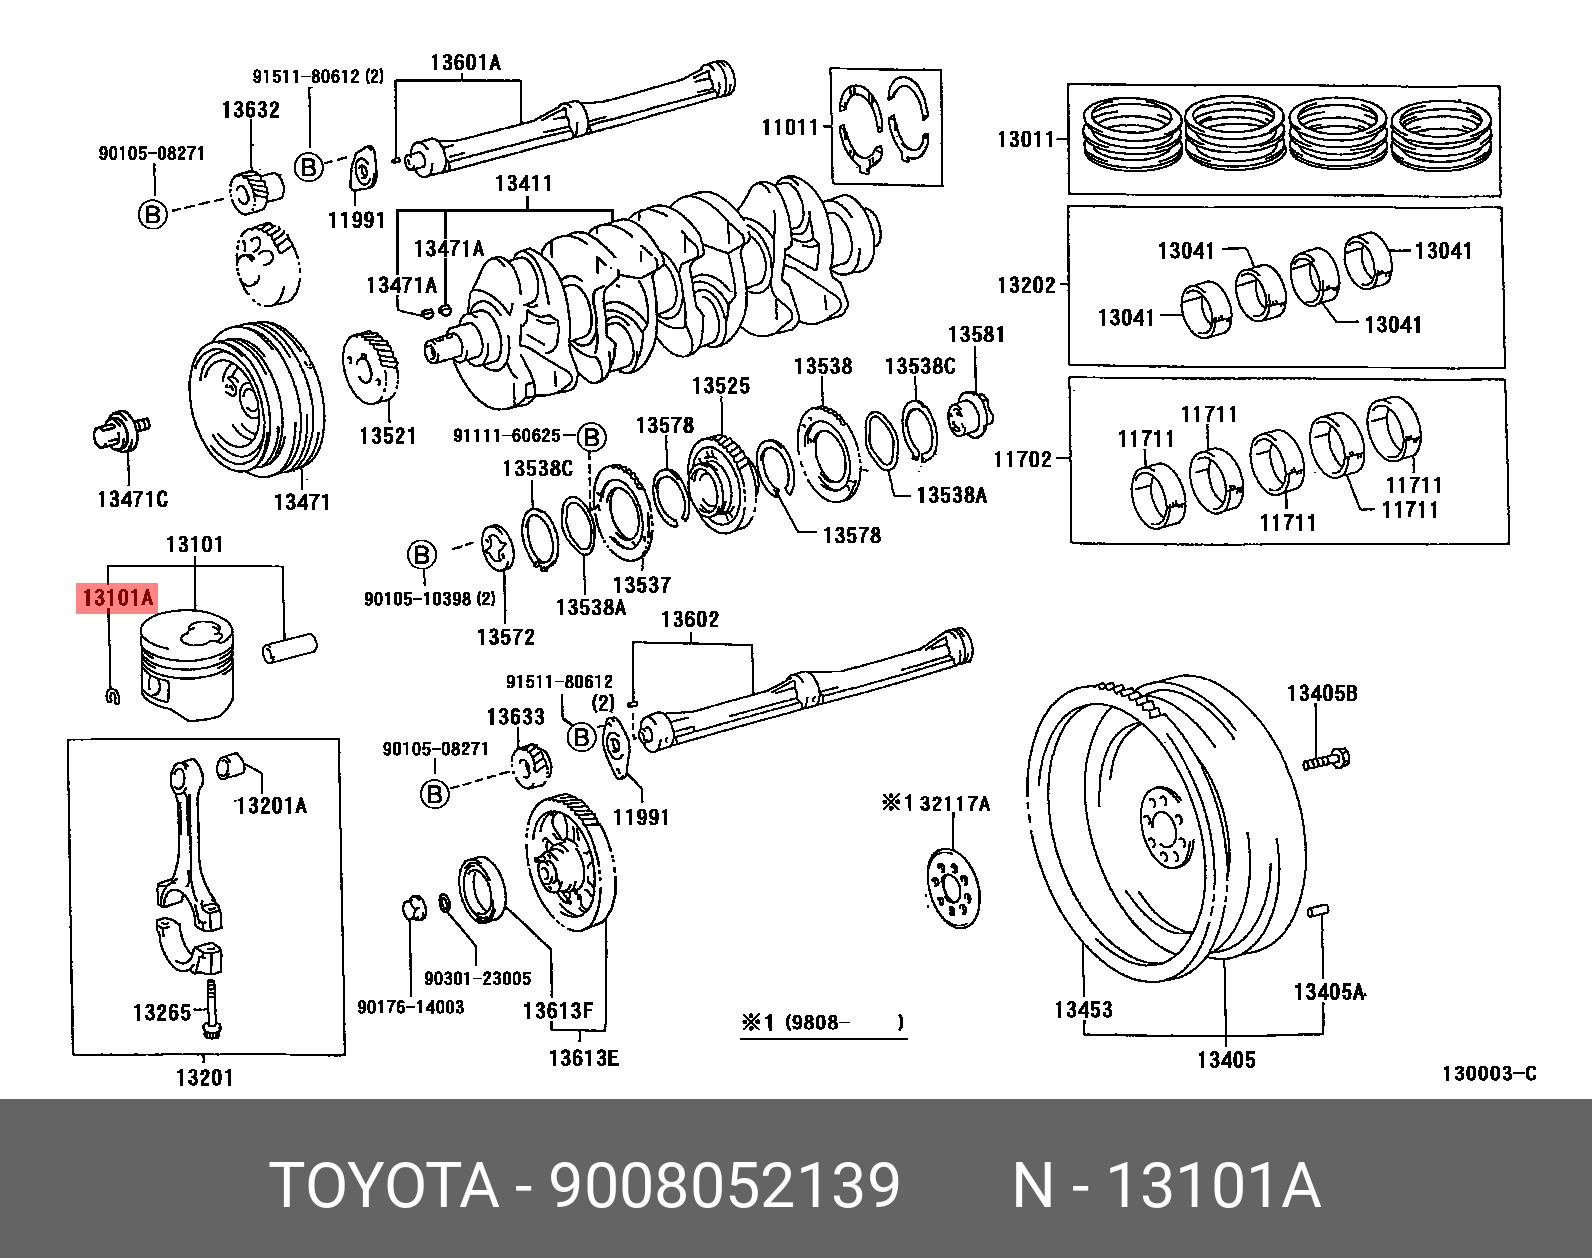 9008052139, PROBOX/ SUCCEED 200206-201409, NCP5#, NLP51, RING, HOLE SNAP(FOR PISTON PIN)